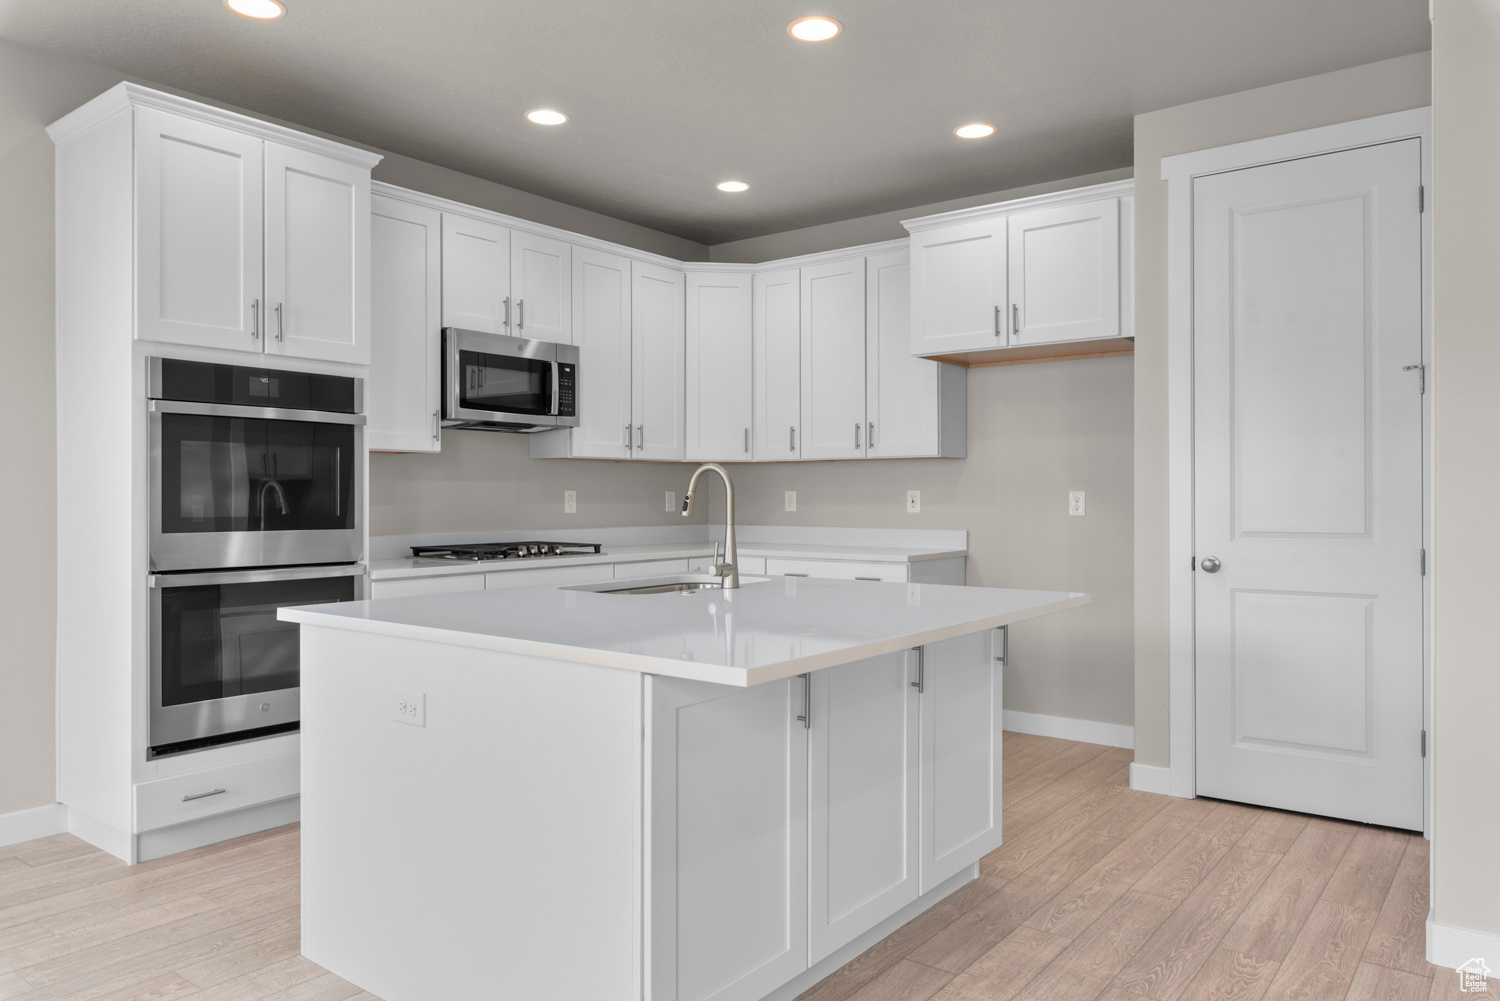 Kitchen with a kitchen island with sink, white cabinetry, sink, appliances with stainless steel finishes, and light hardwood / wood-style flooring